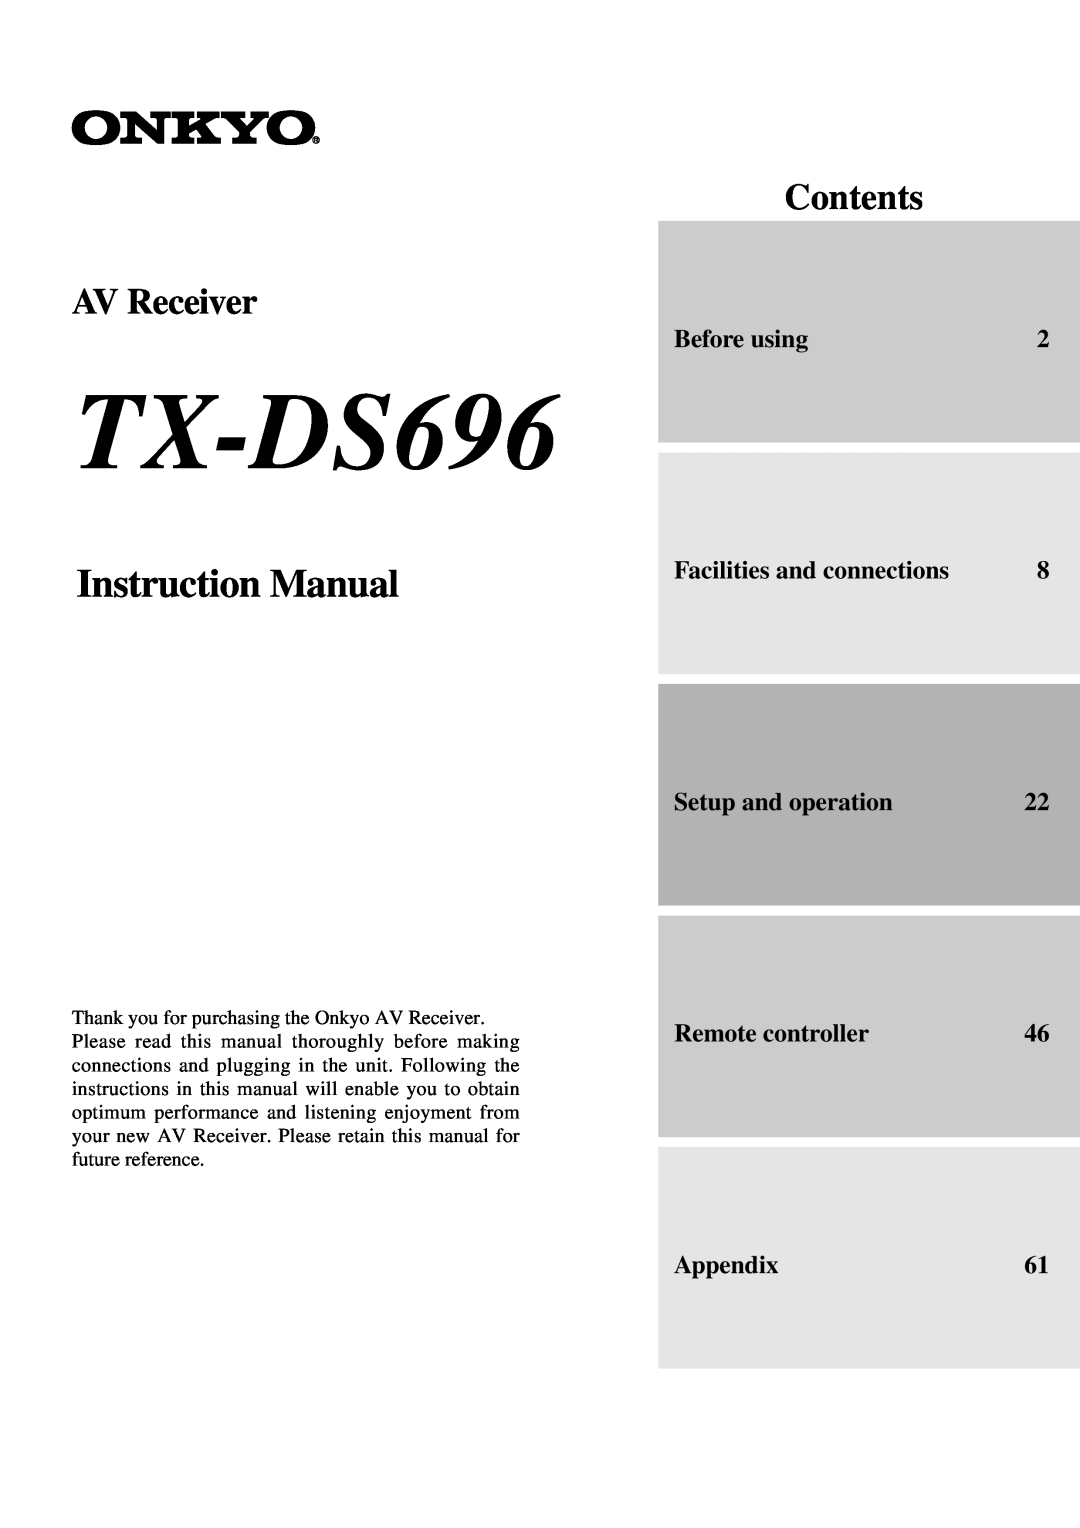 Onkyo TX-DS696 appendix Contents AV Receiver, Before using, Facilities and connections, Setup and operation, Appendix61 